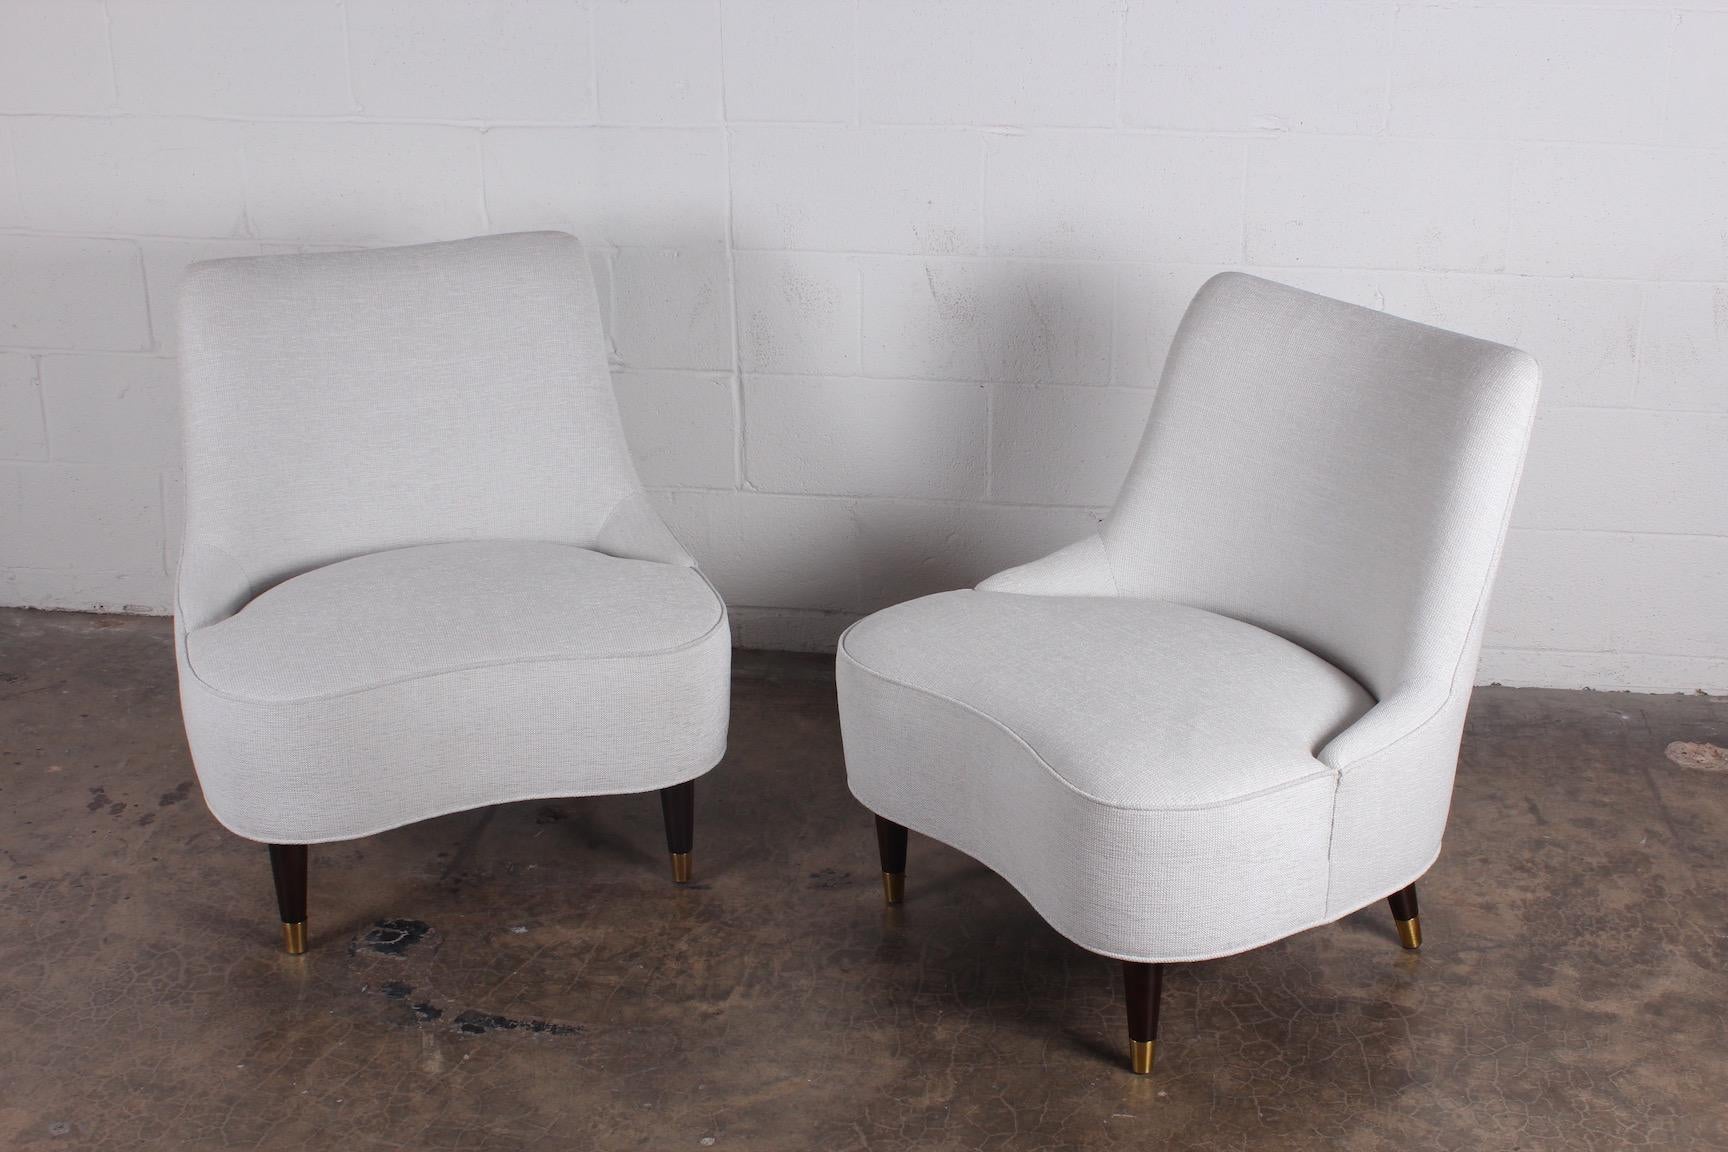 Mid-20th Century Pair of Teardrop Slipper Chairs by Edward Wormley for Dunbar